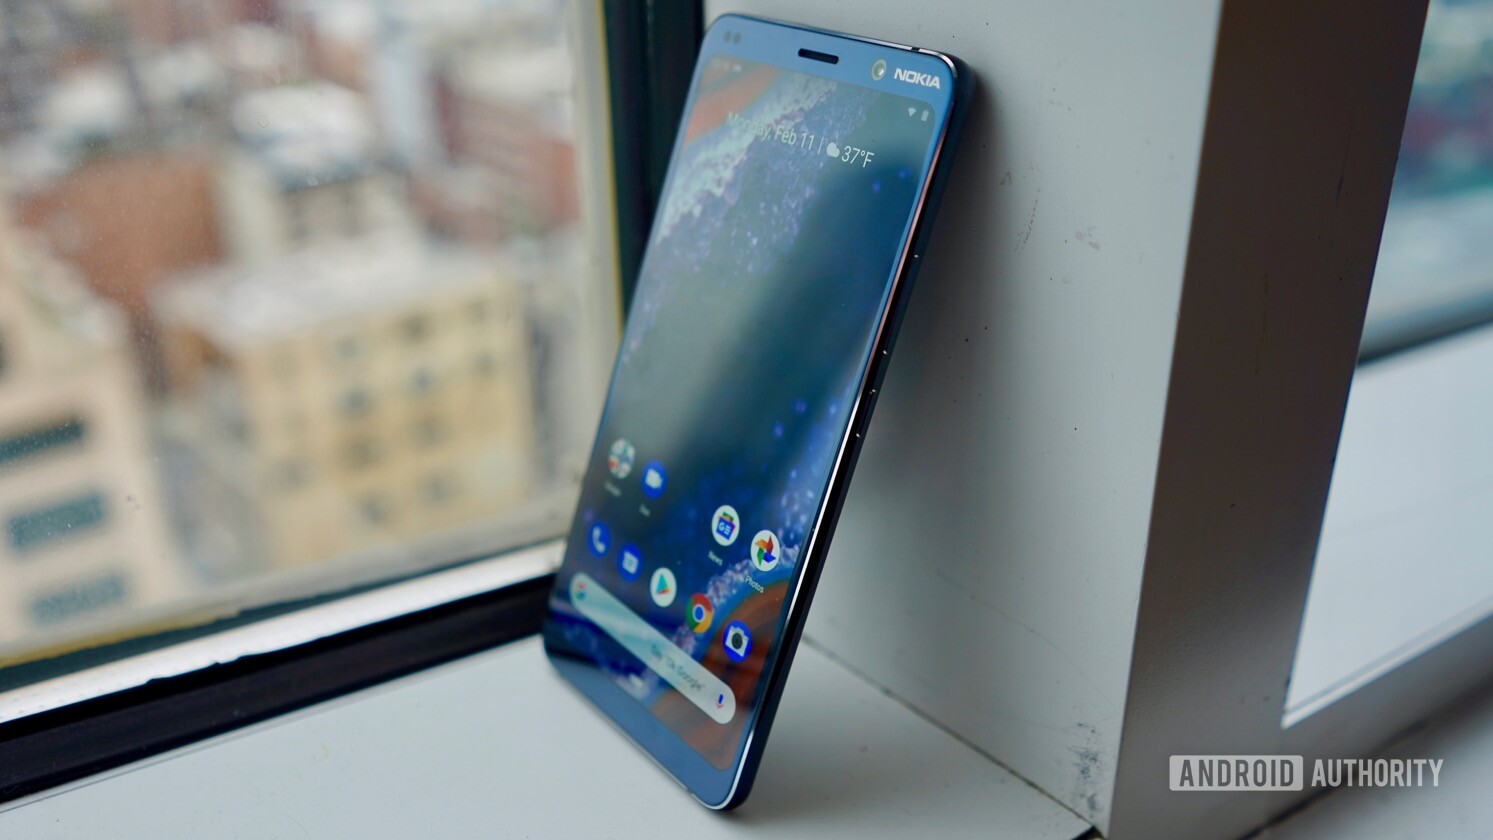 The front and side of the Nokia 9 PureView smartphone.